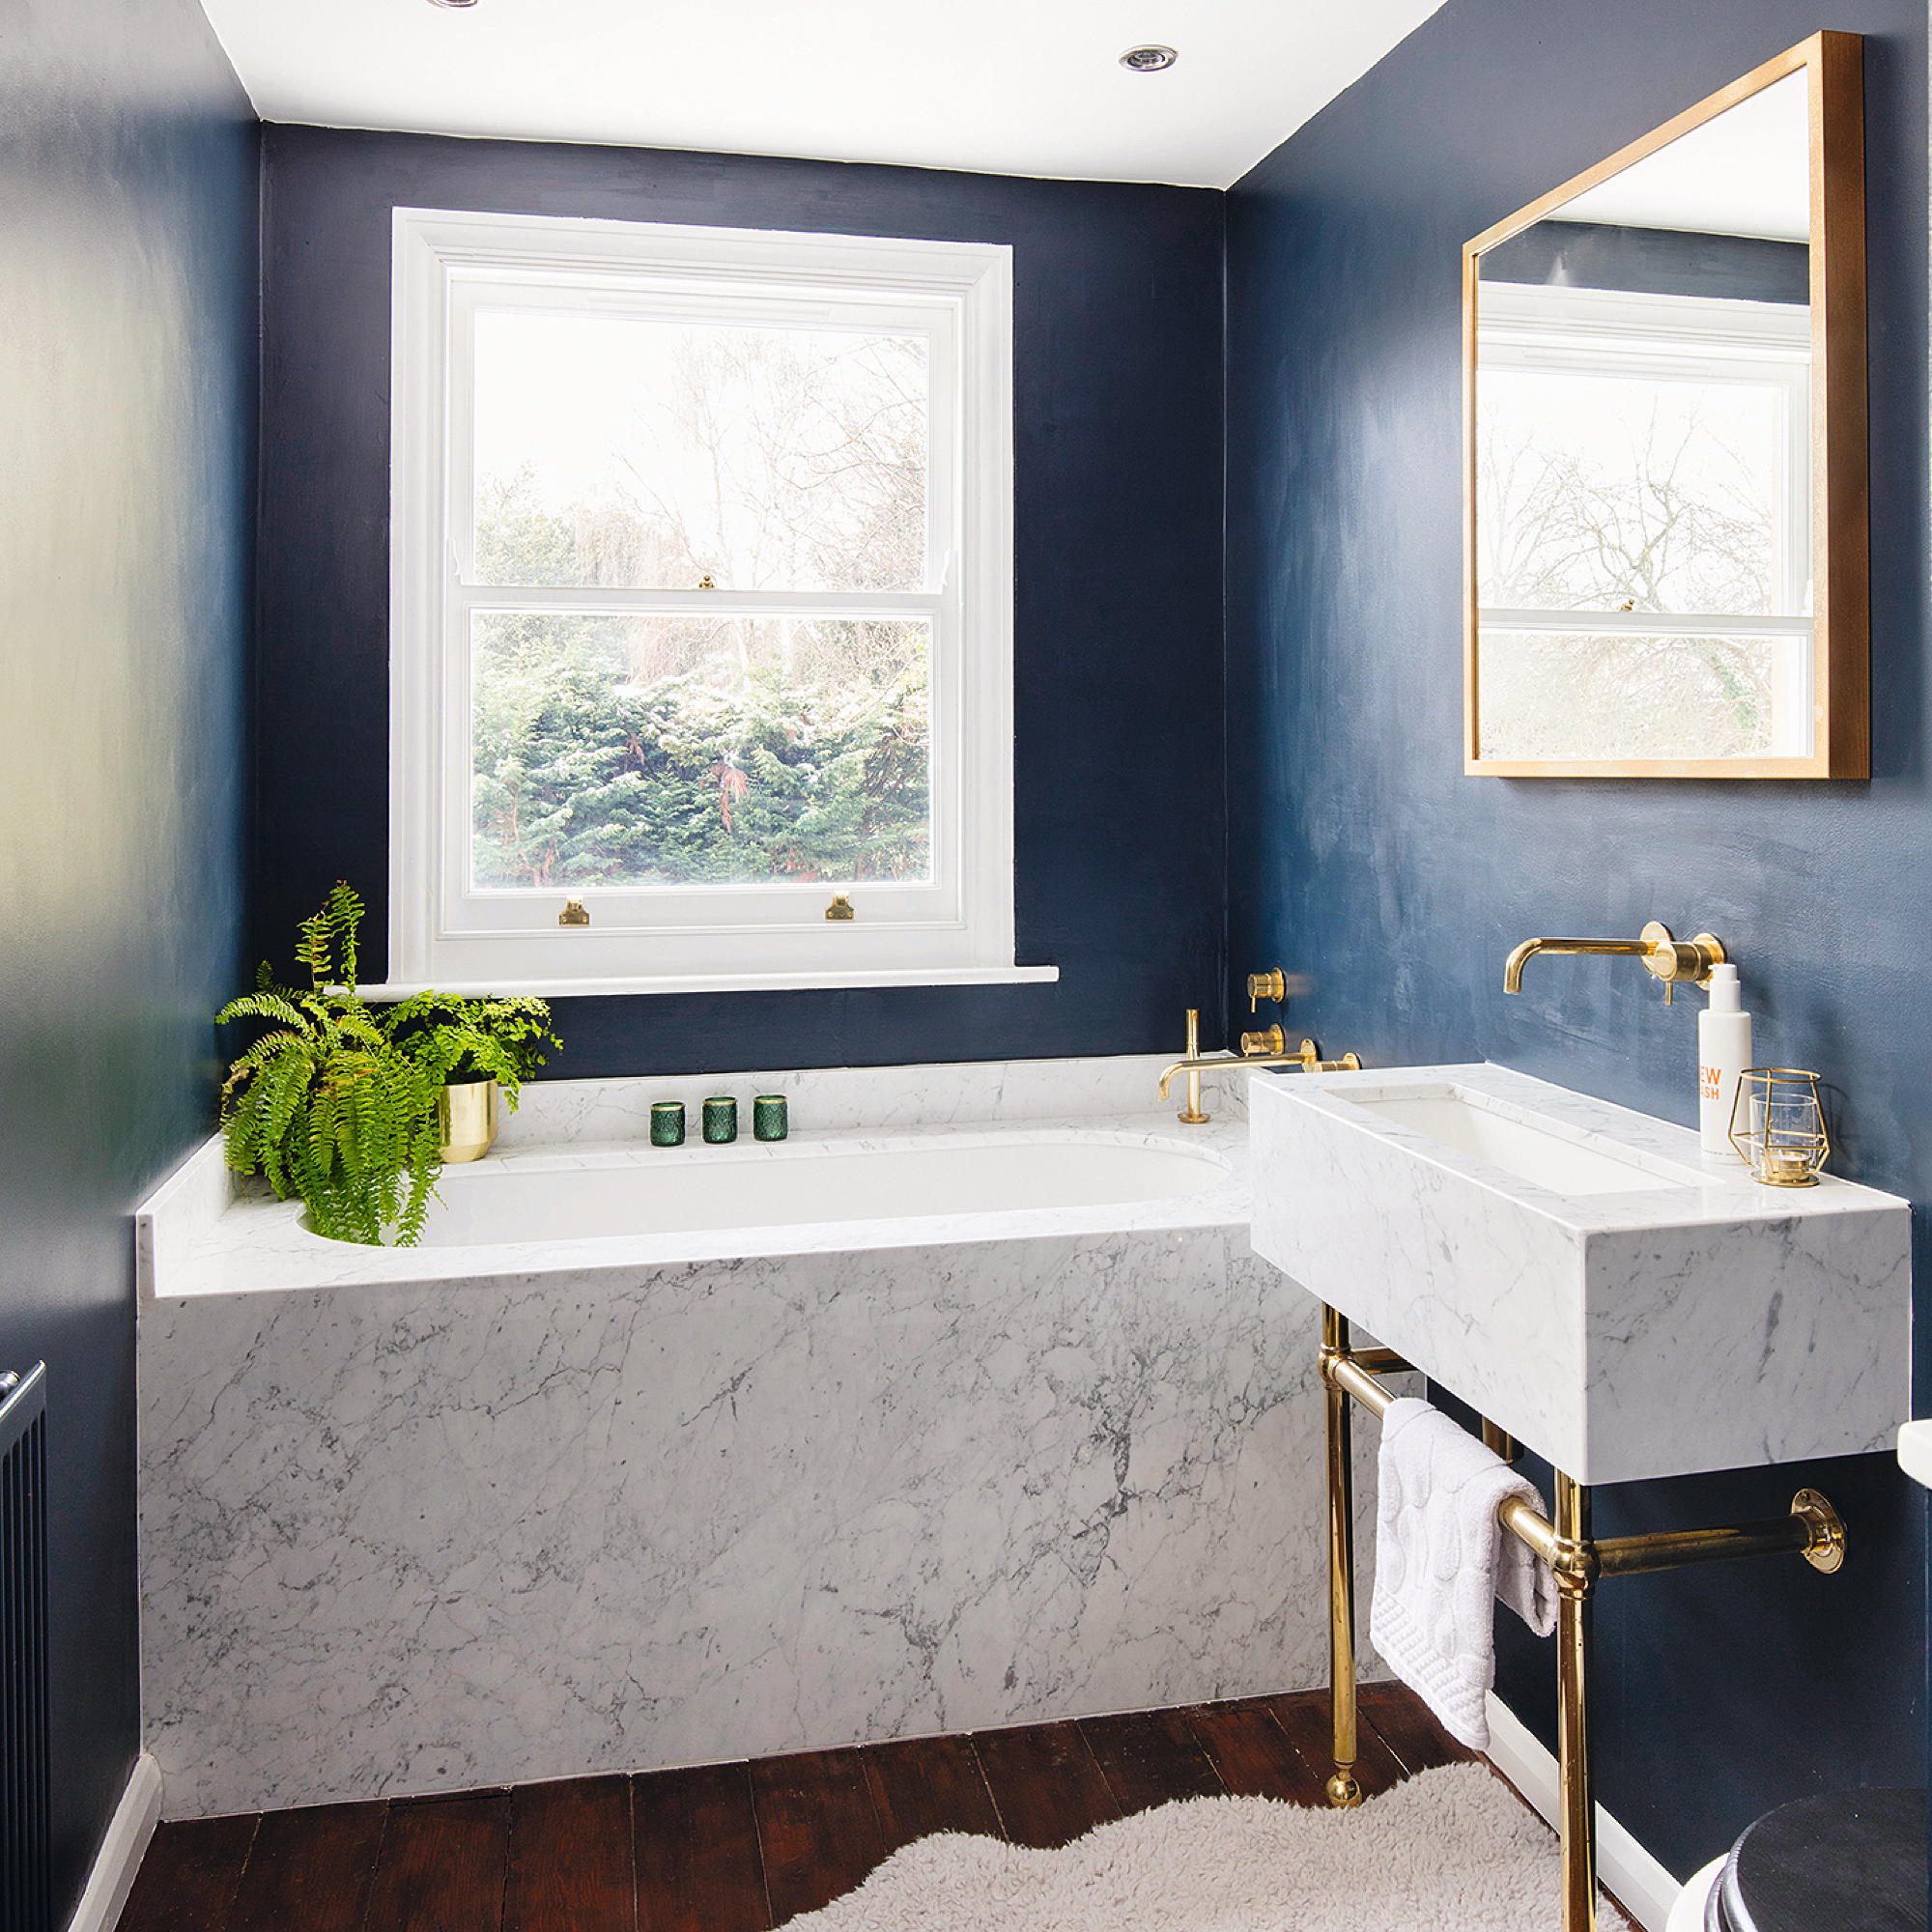 Go Bold With These 5 Eye-Catching Ideas For a Small Bathroom Remodel |  Small bathroom colors, Small bathroom remodel, Bathroom makeover